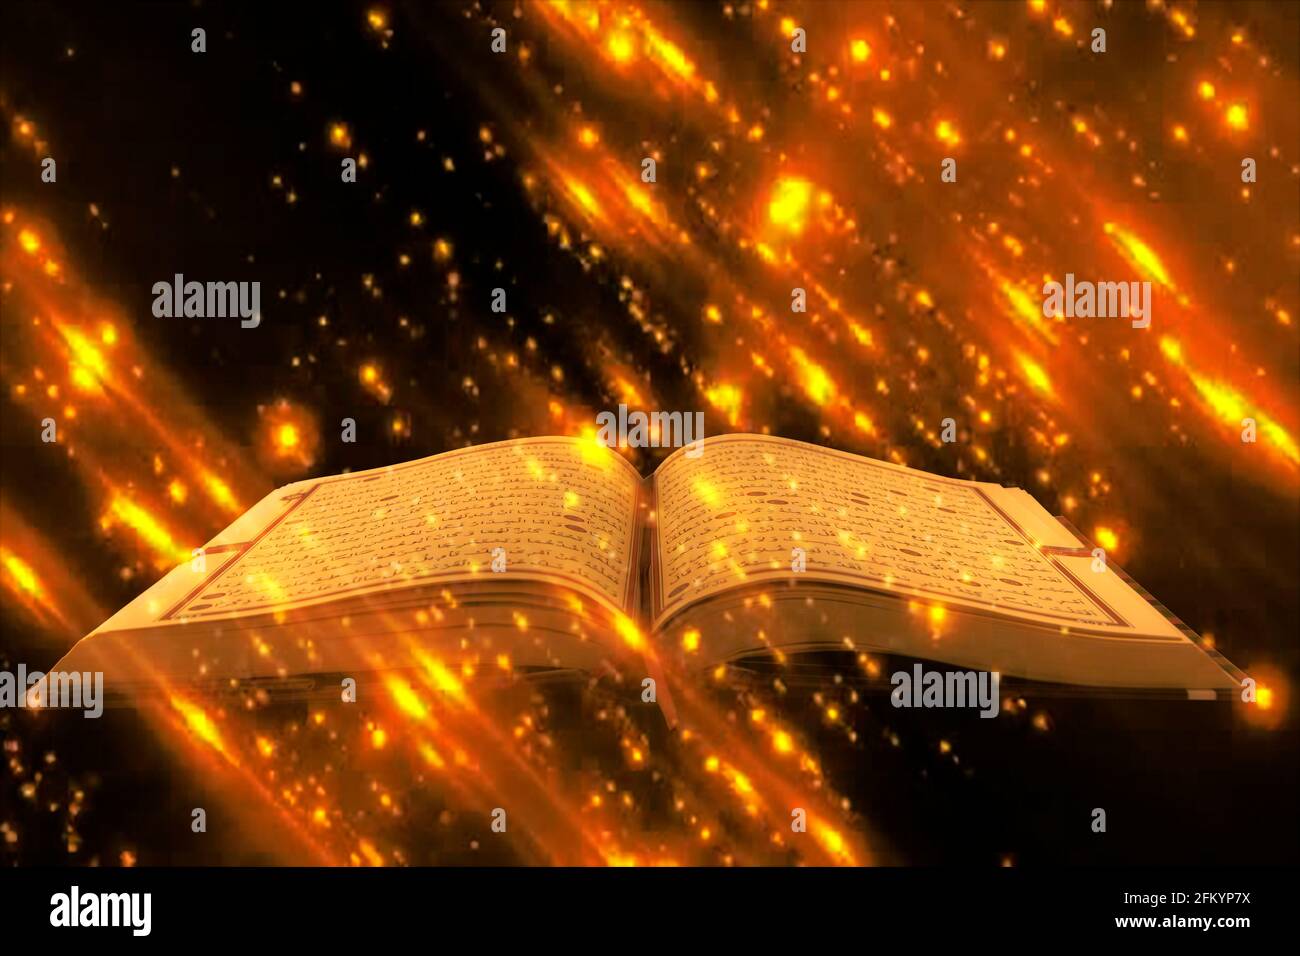 Glitters on the Quran on a black background Stock Photo